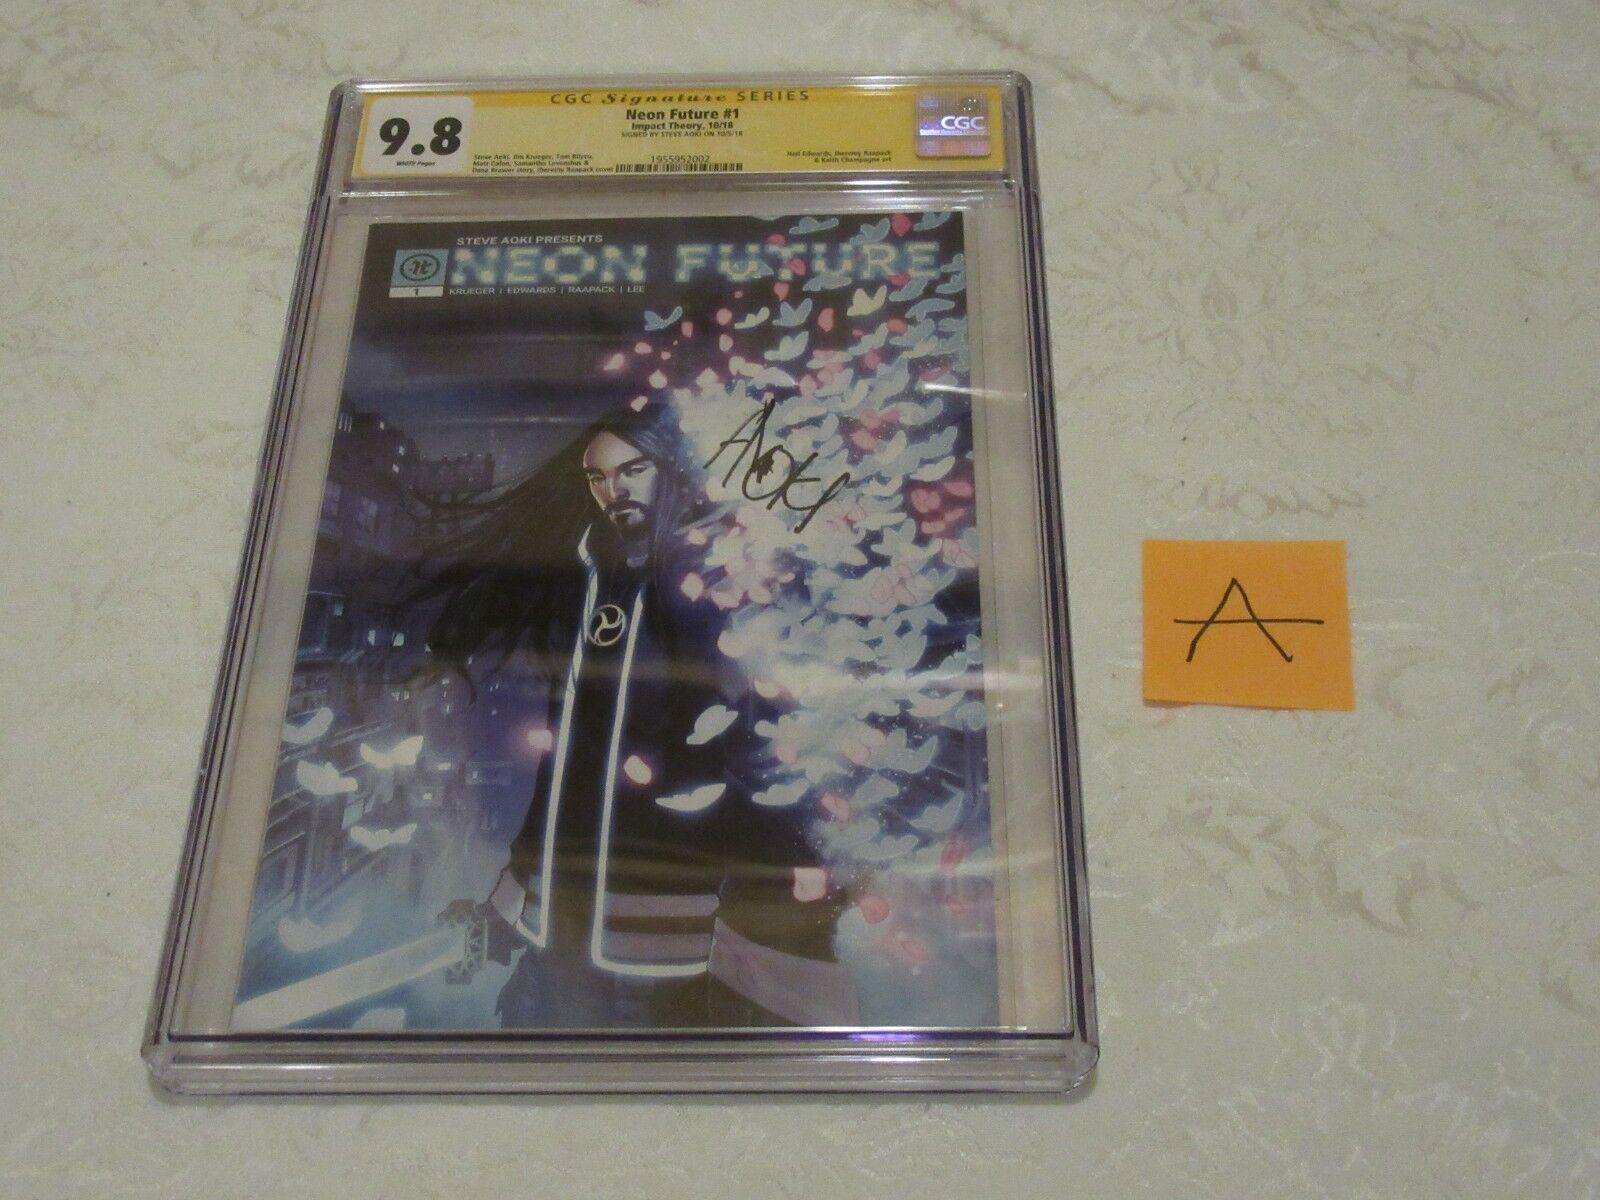 CGC SS Neon Future #1 Impact Theory Comic Book Signed By Steve Aoki 9.8 A